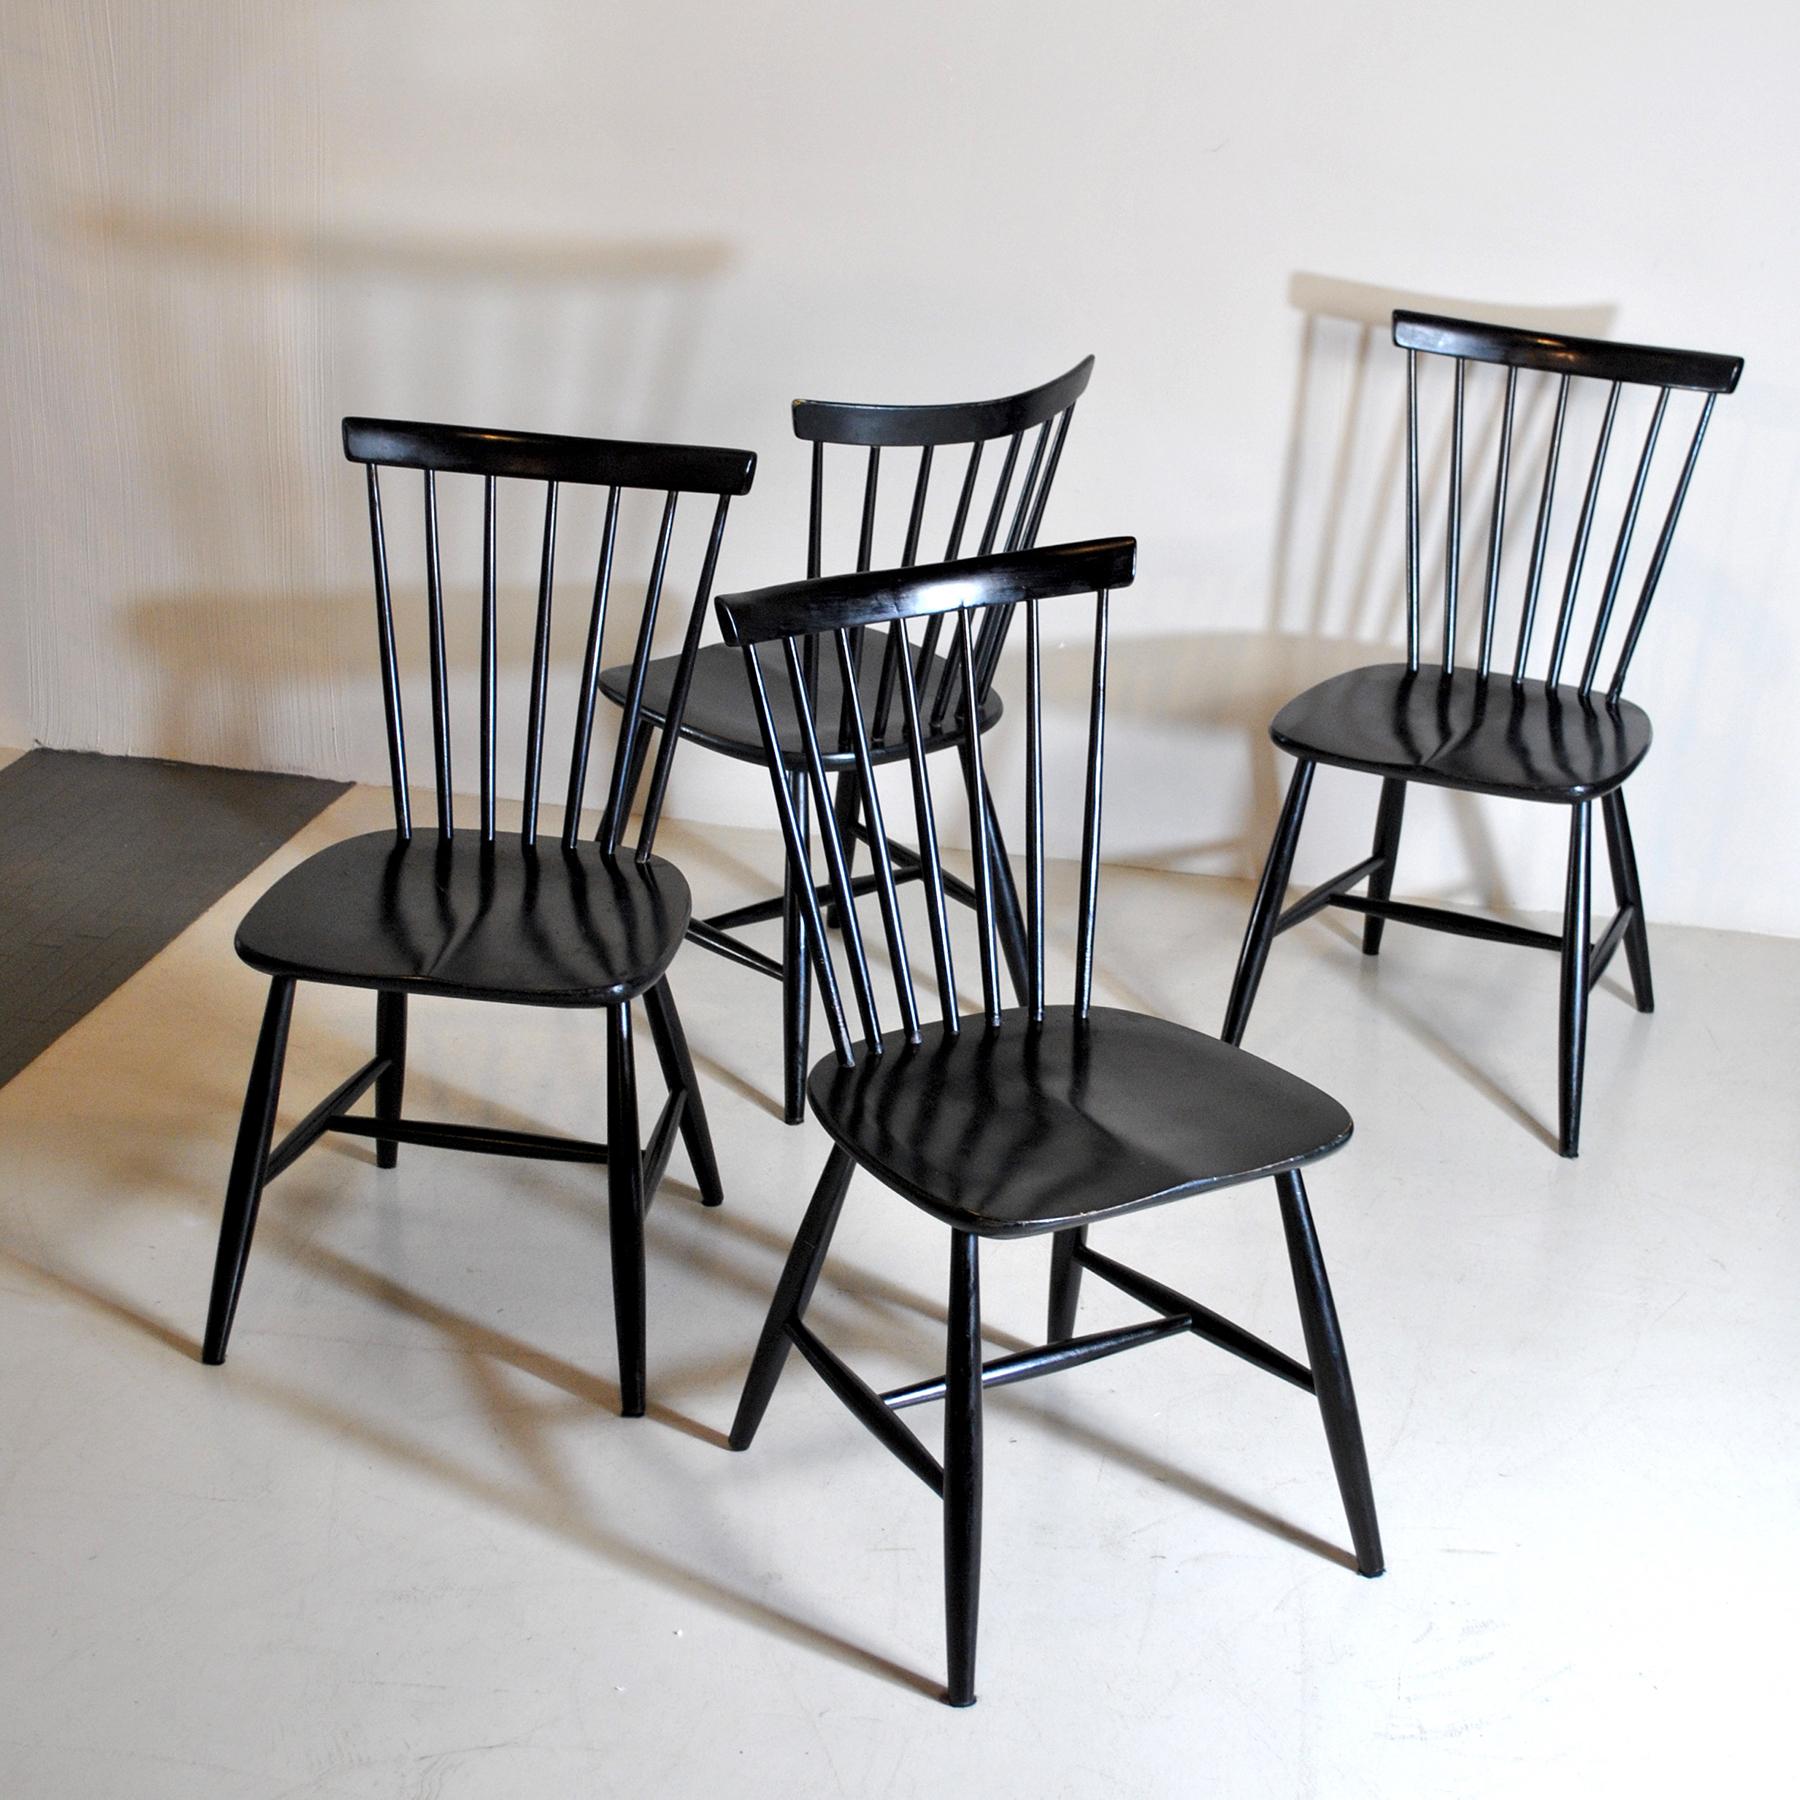 Wood Haga Fors Chairs Scandinavian Style For Sale